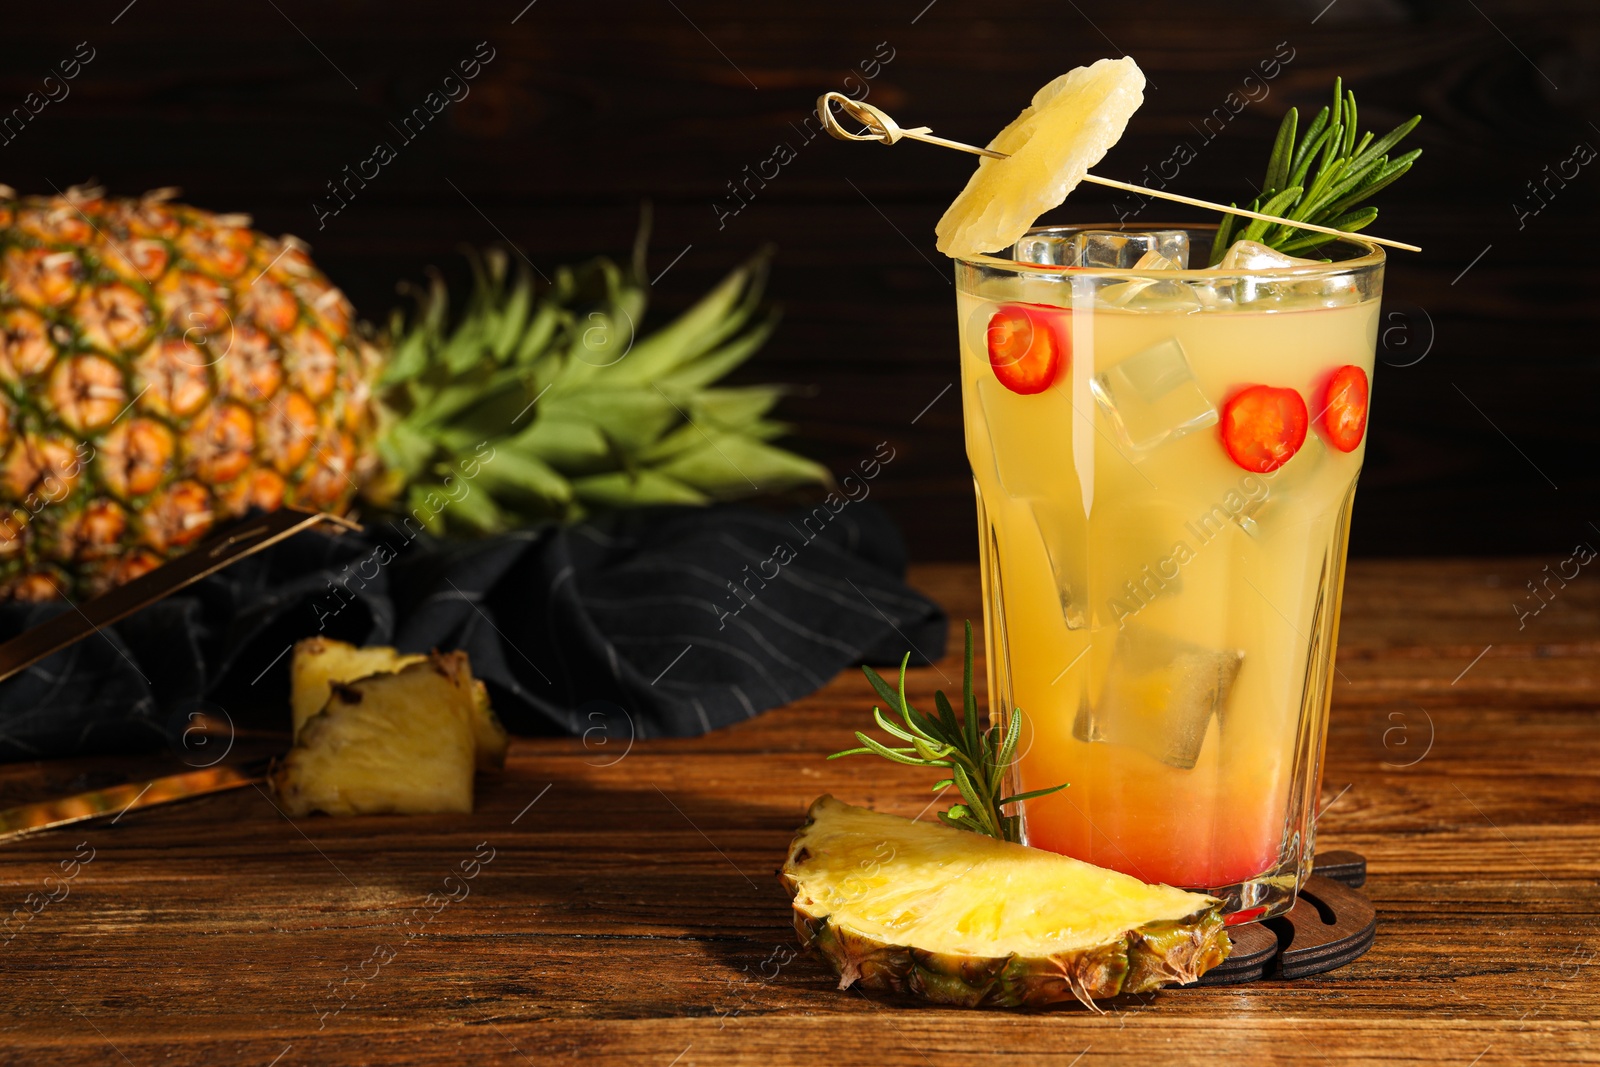 Photo of Spicy pineapple cocktail with chili pepper, rosemary and fresh fruit on wooden table